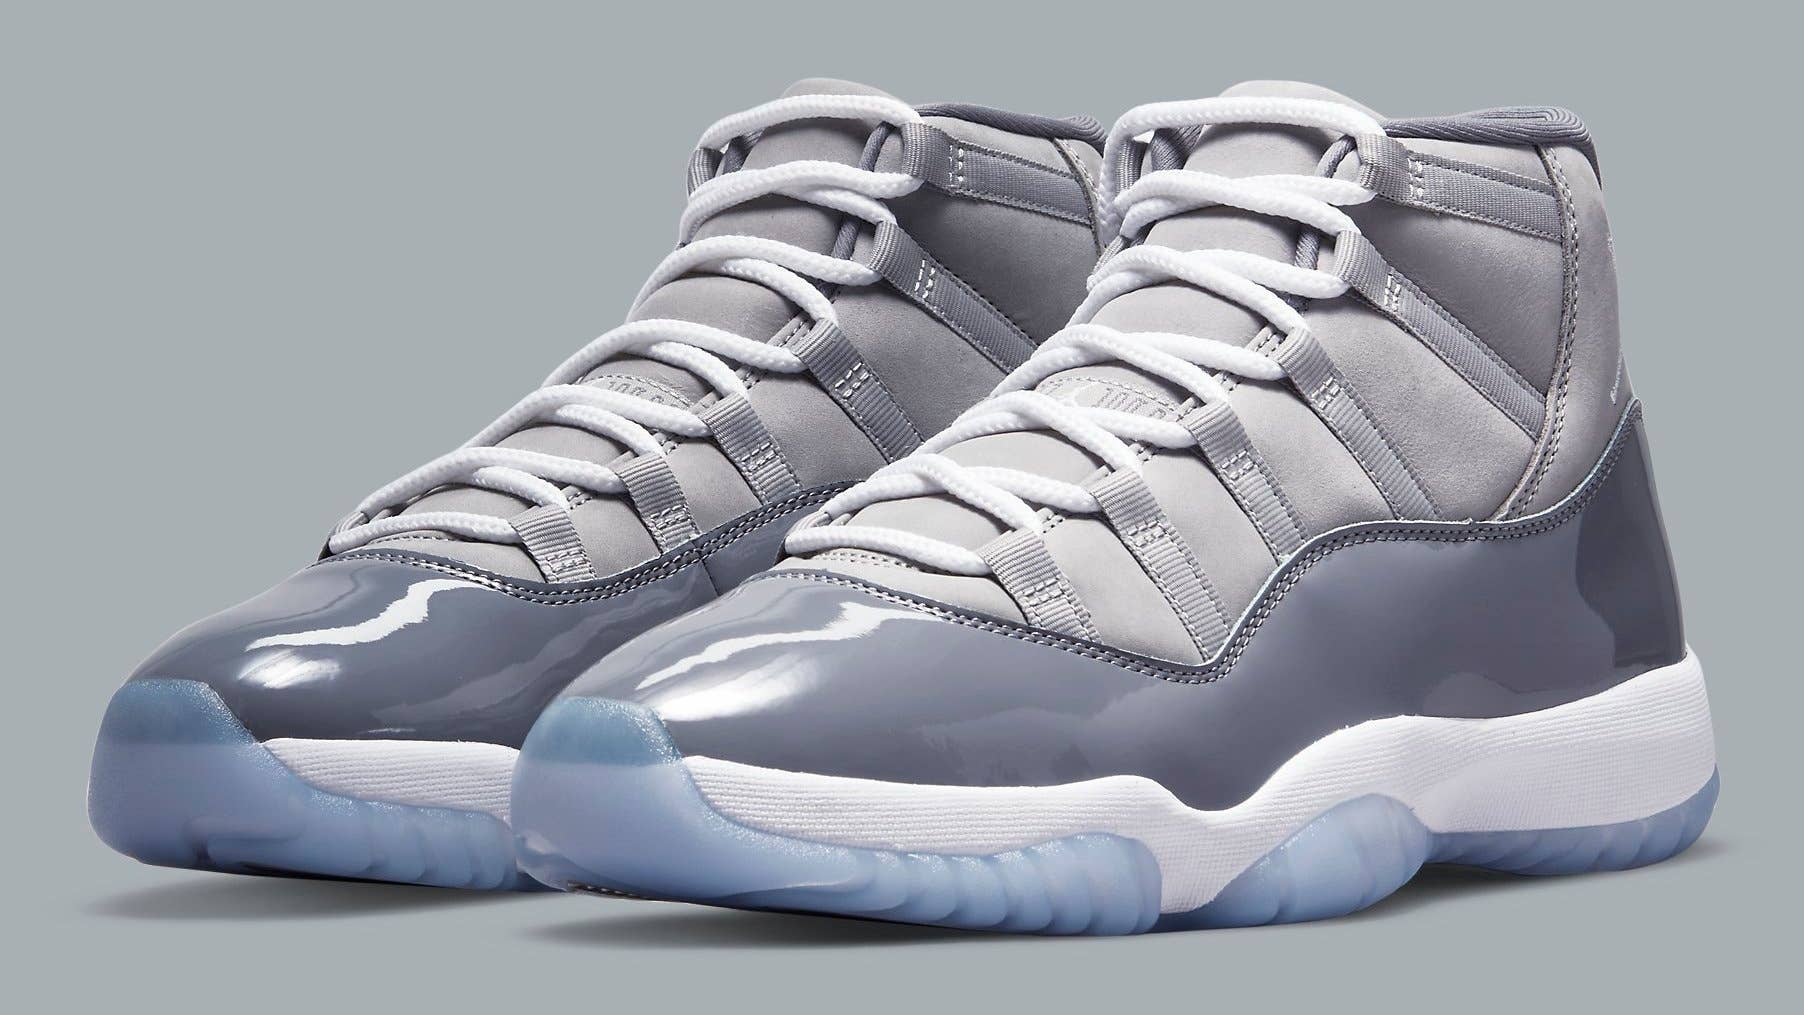 Official Look at This Year's 'Cool Grey' Air Jordan 11s | Complex